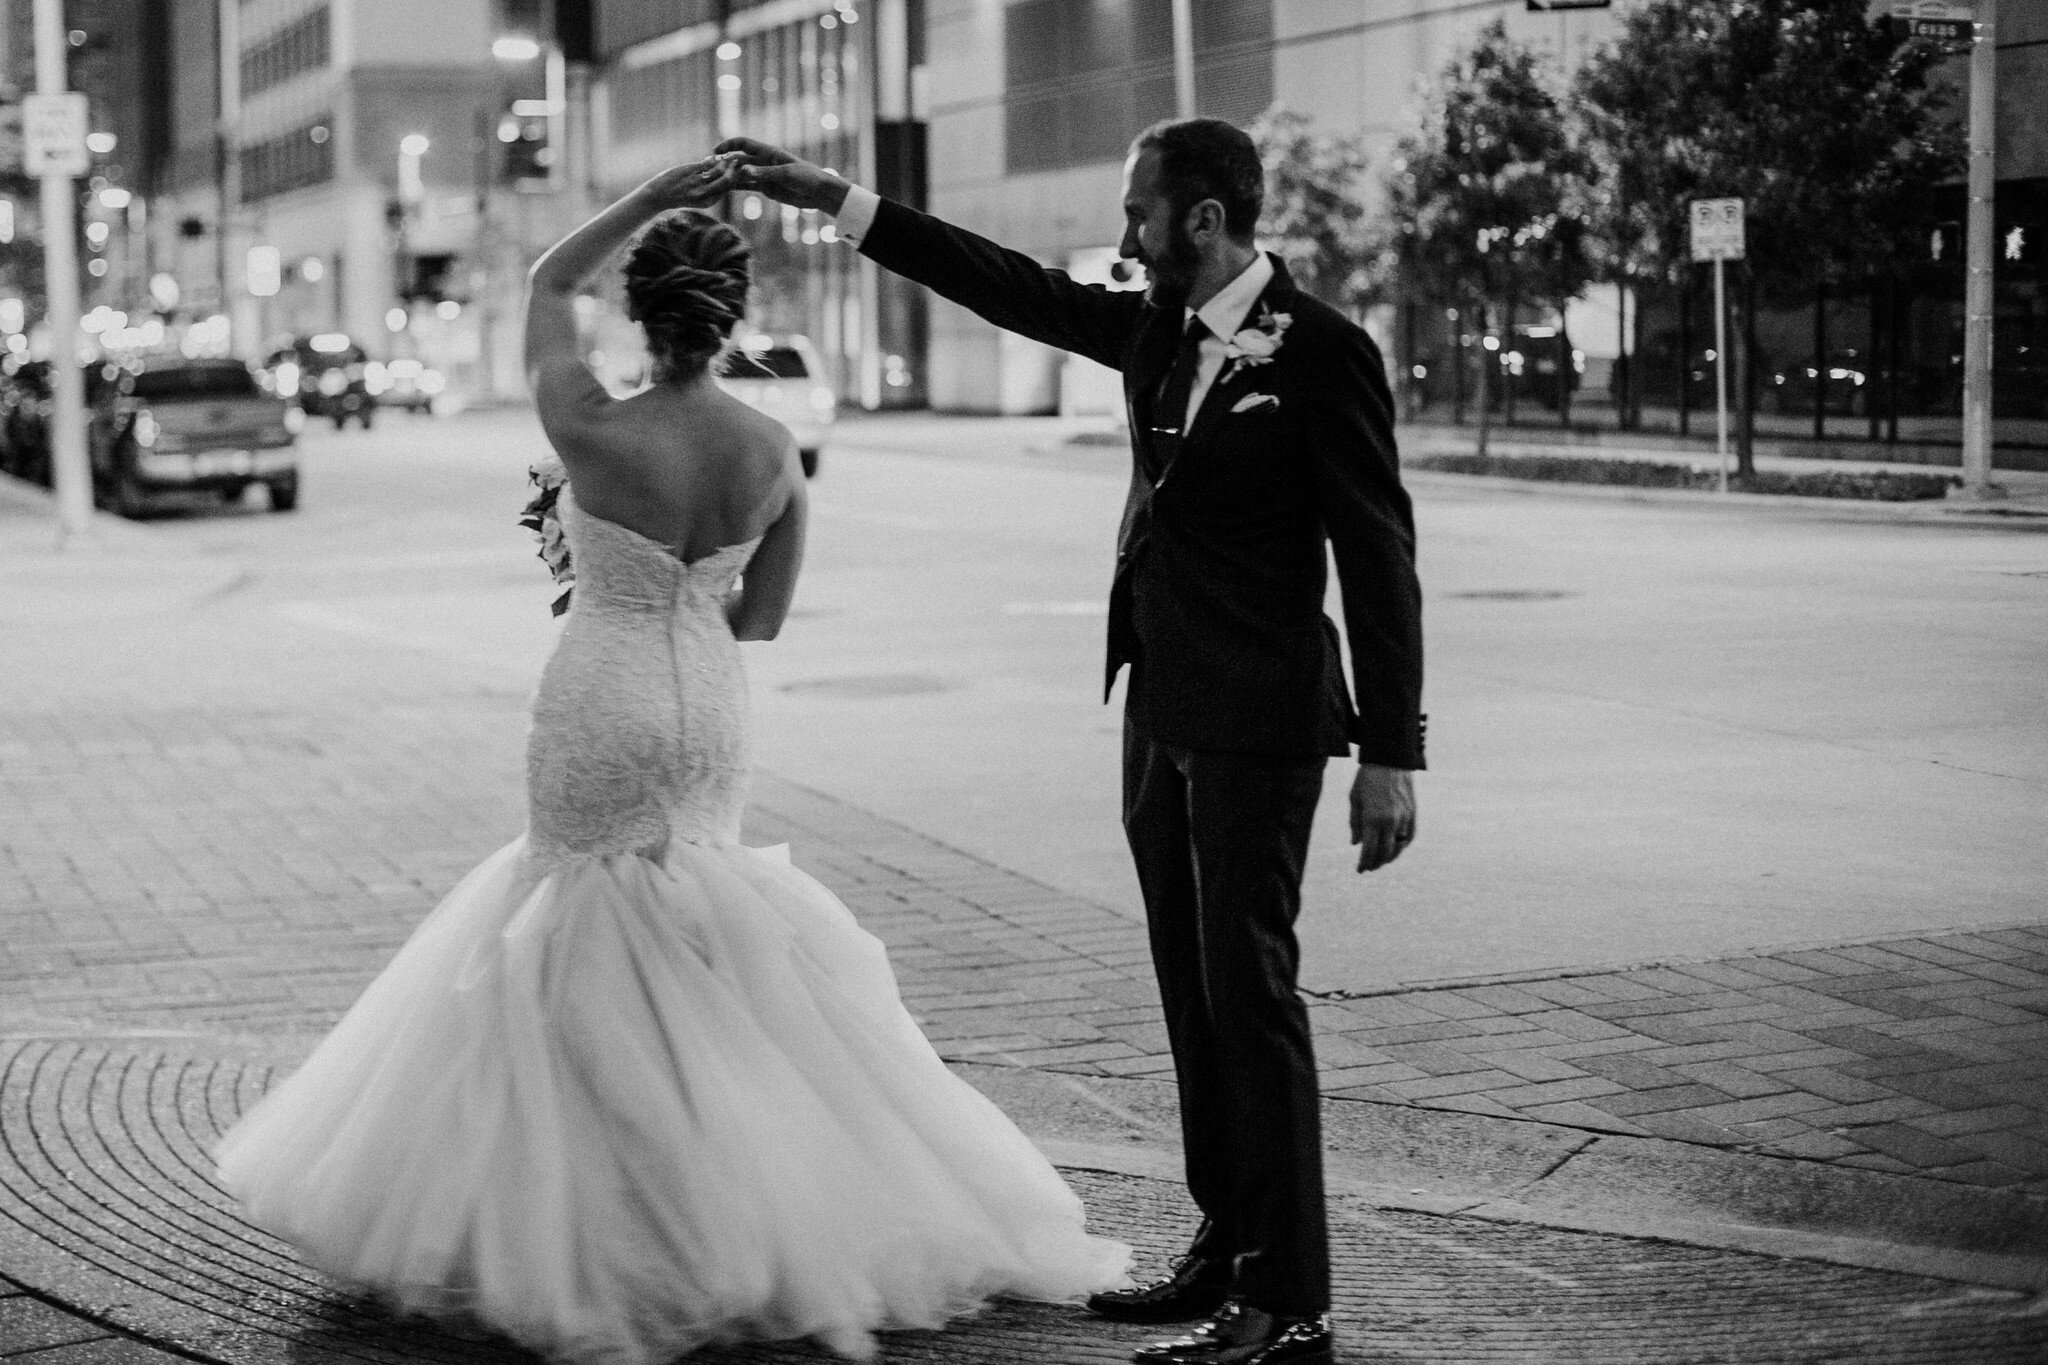 Bride and groom portraits downtown. Wedding at The Sam Houston Hotel (Houston TX)